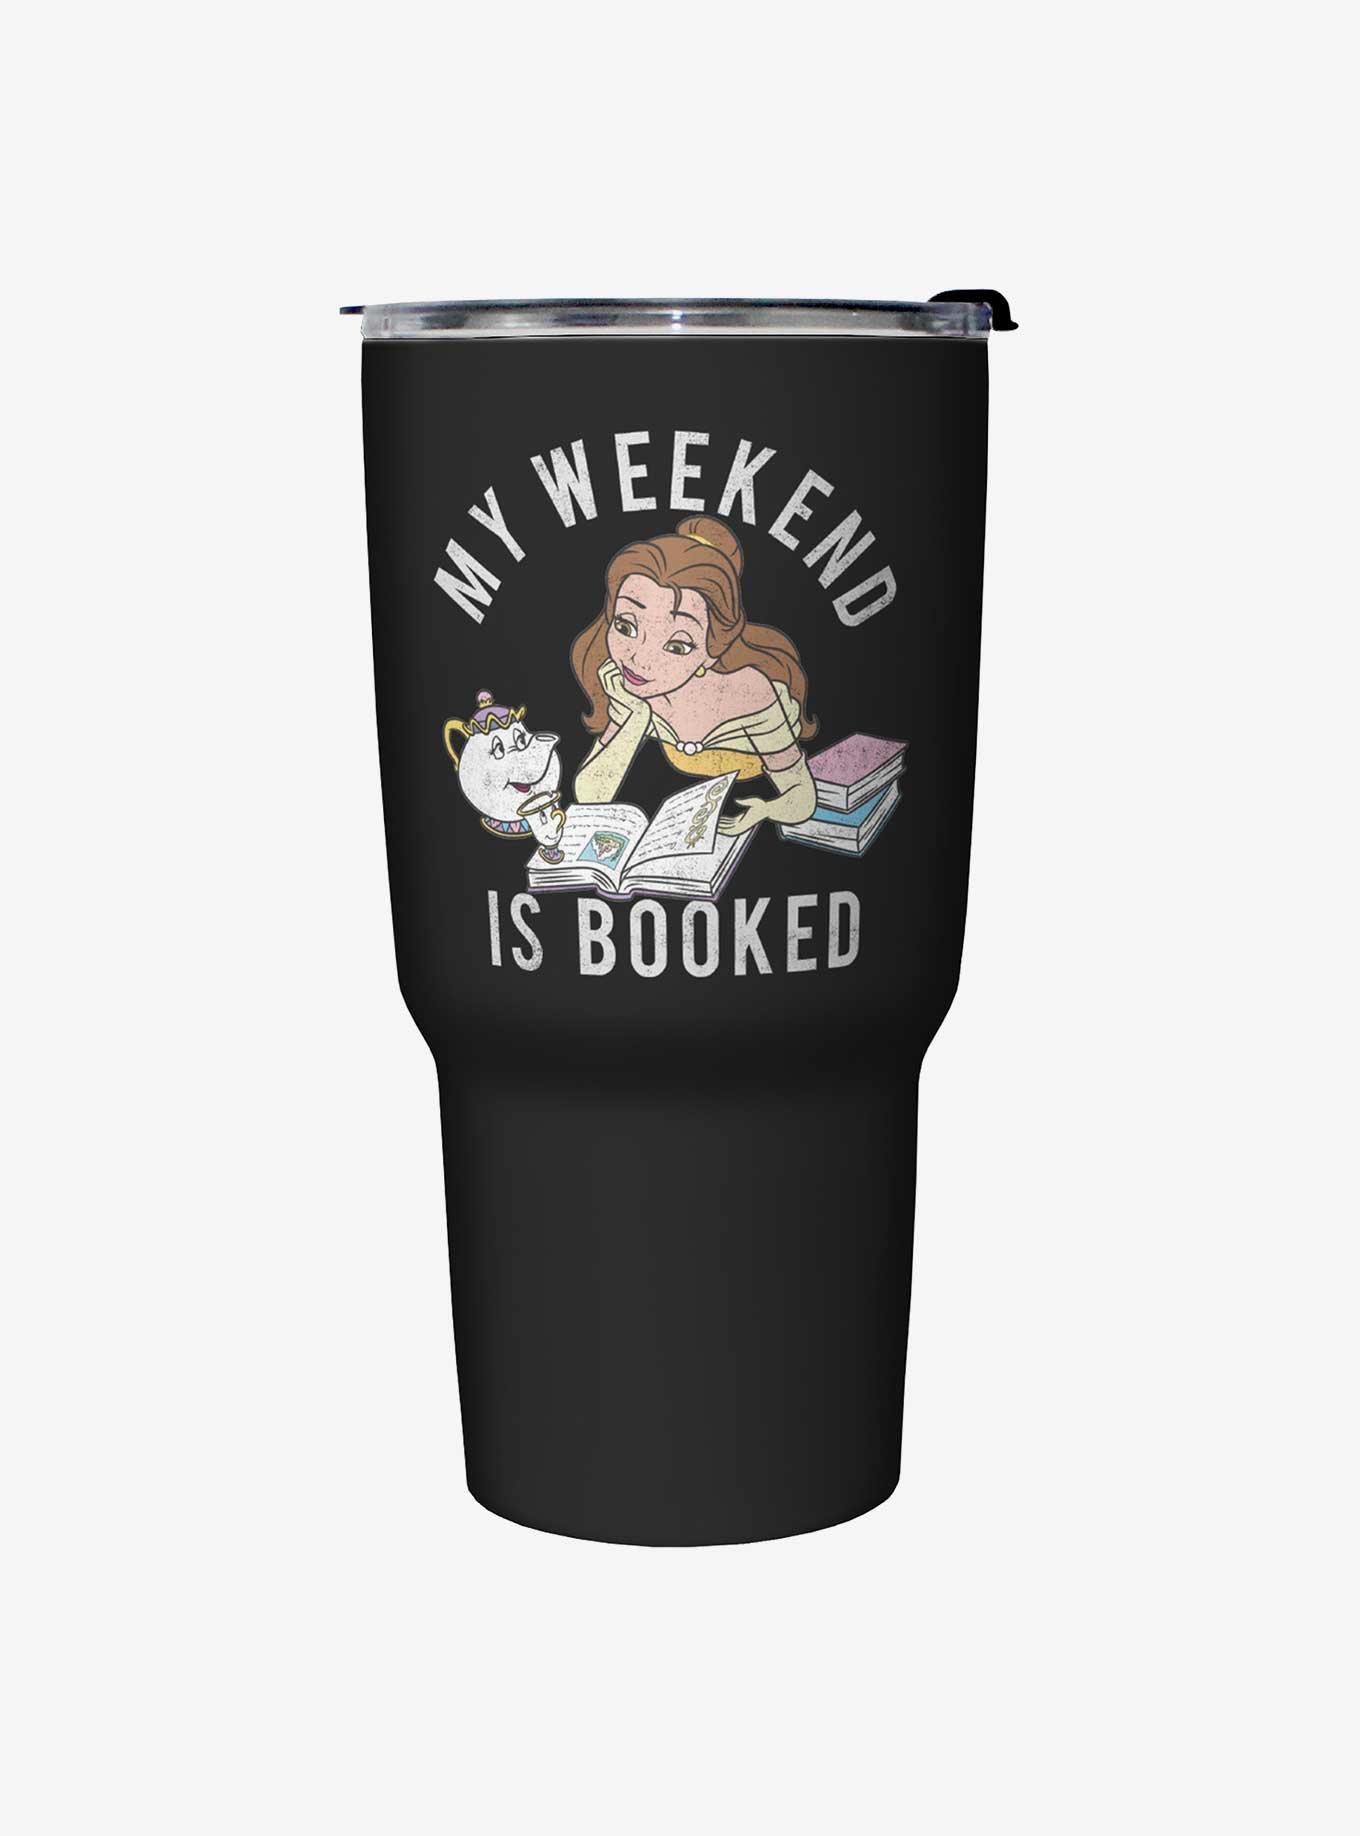 Disney Beauty and the Beast Belle Weekend Booked Travel Mug, , hi-res